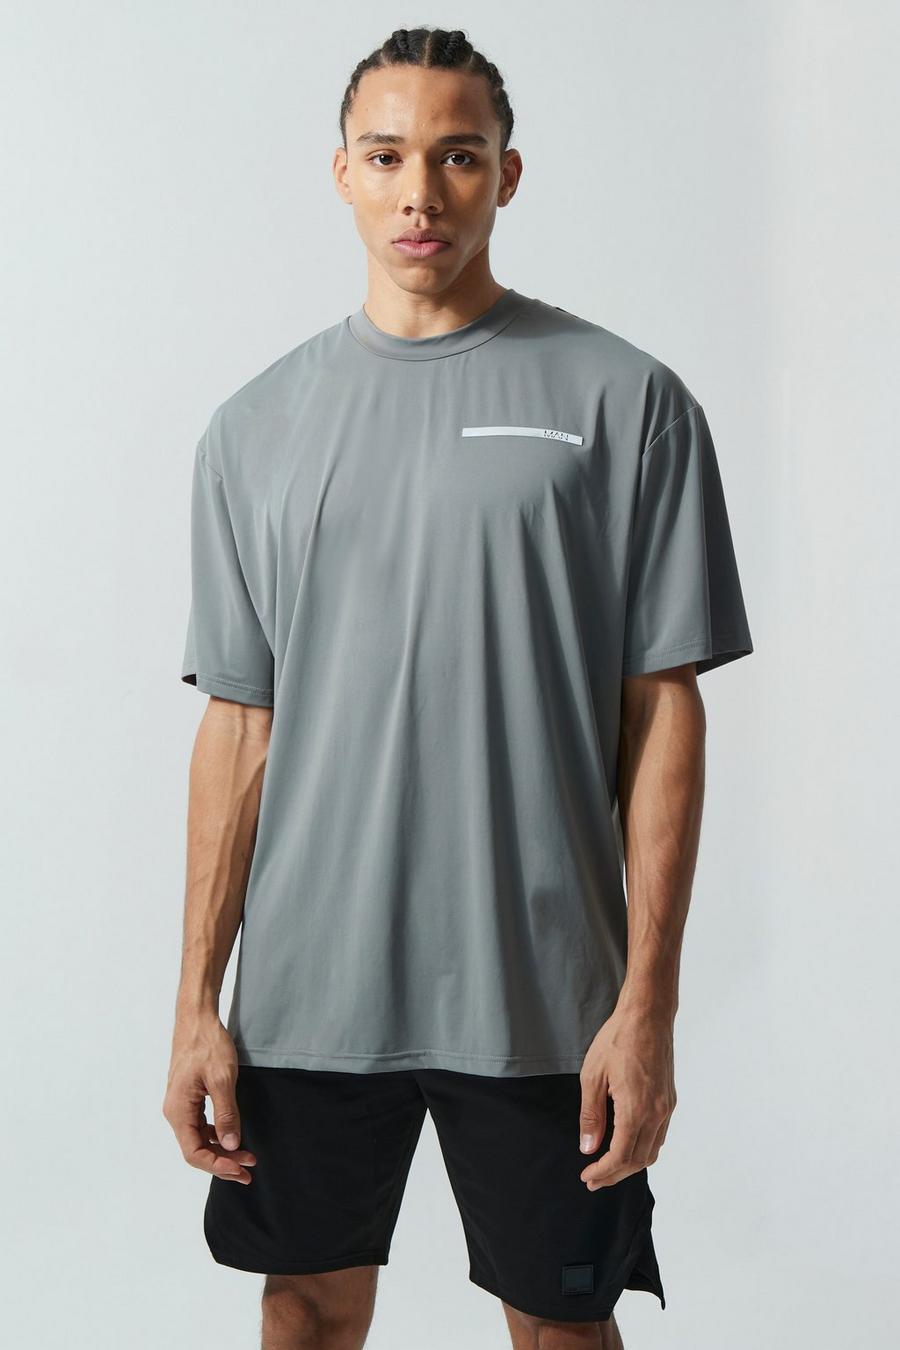 Charcoal grey Tall Man Active Performance Oversized T Shirt